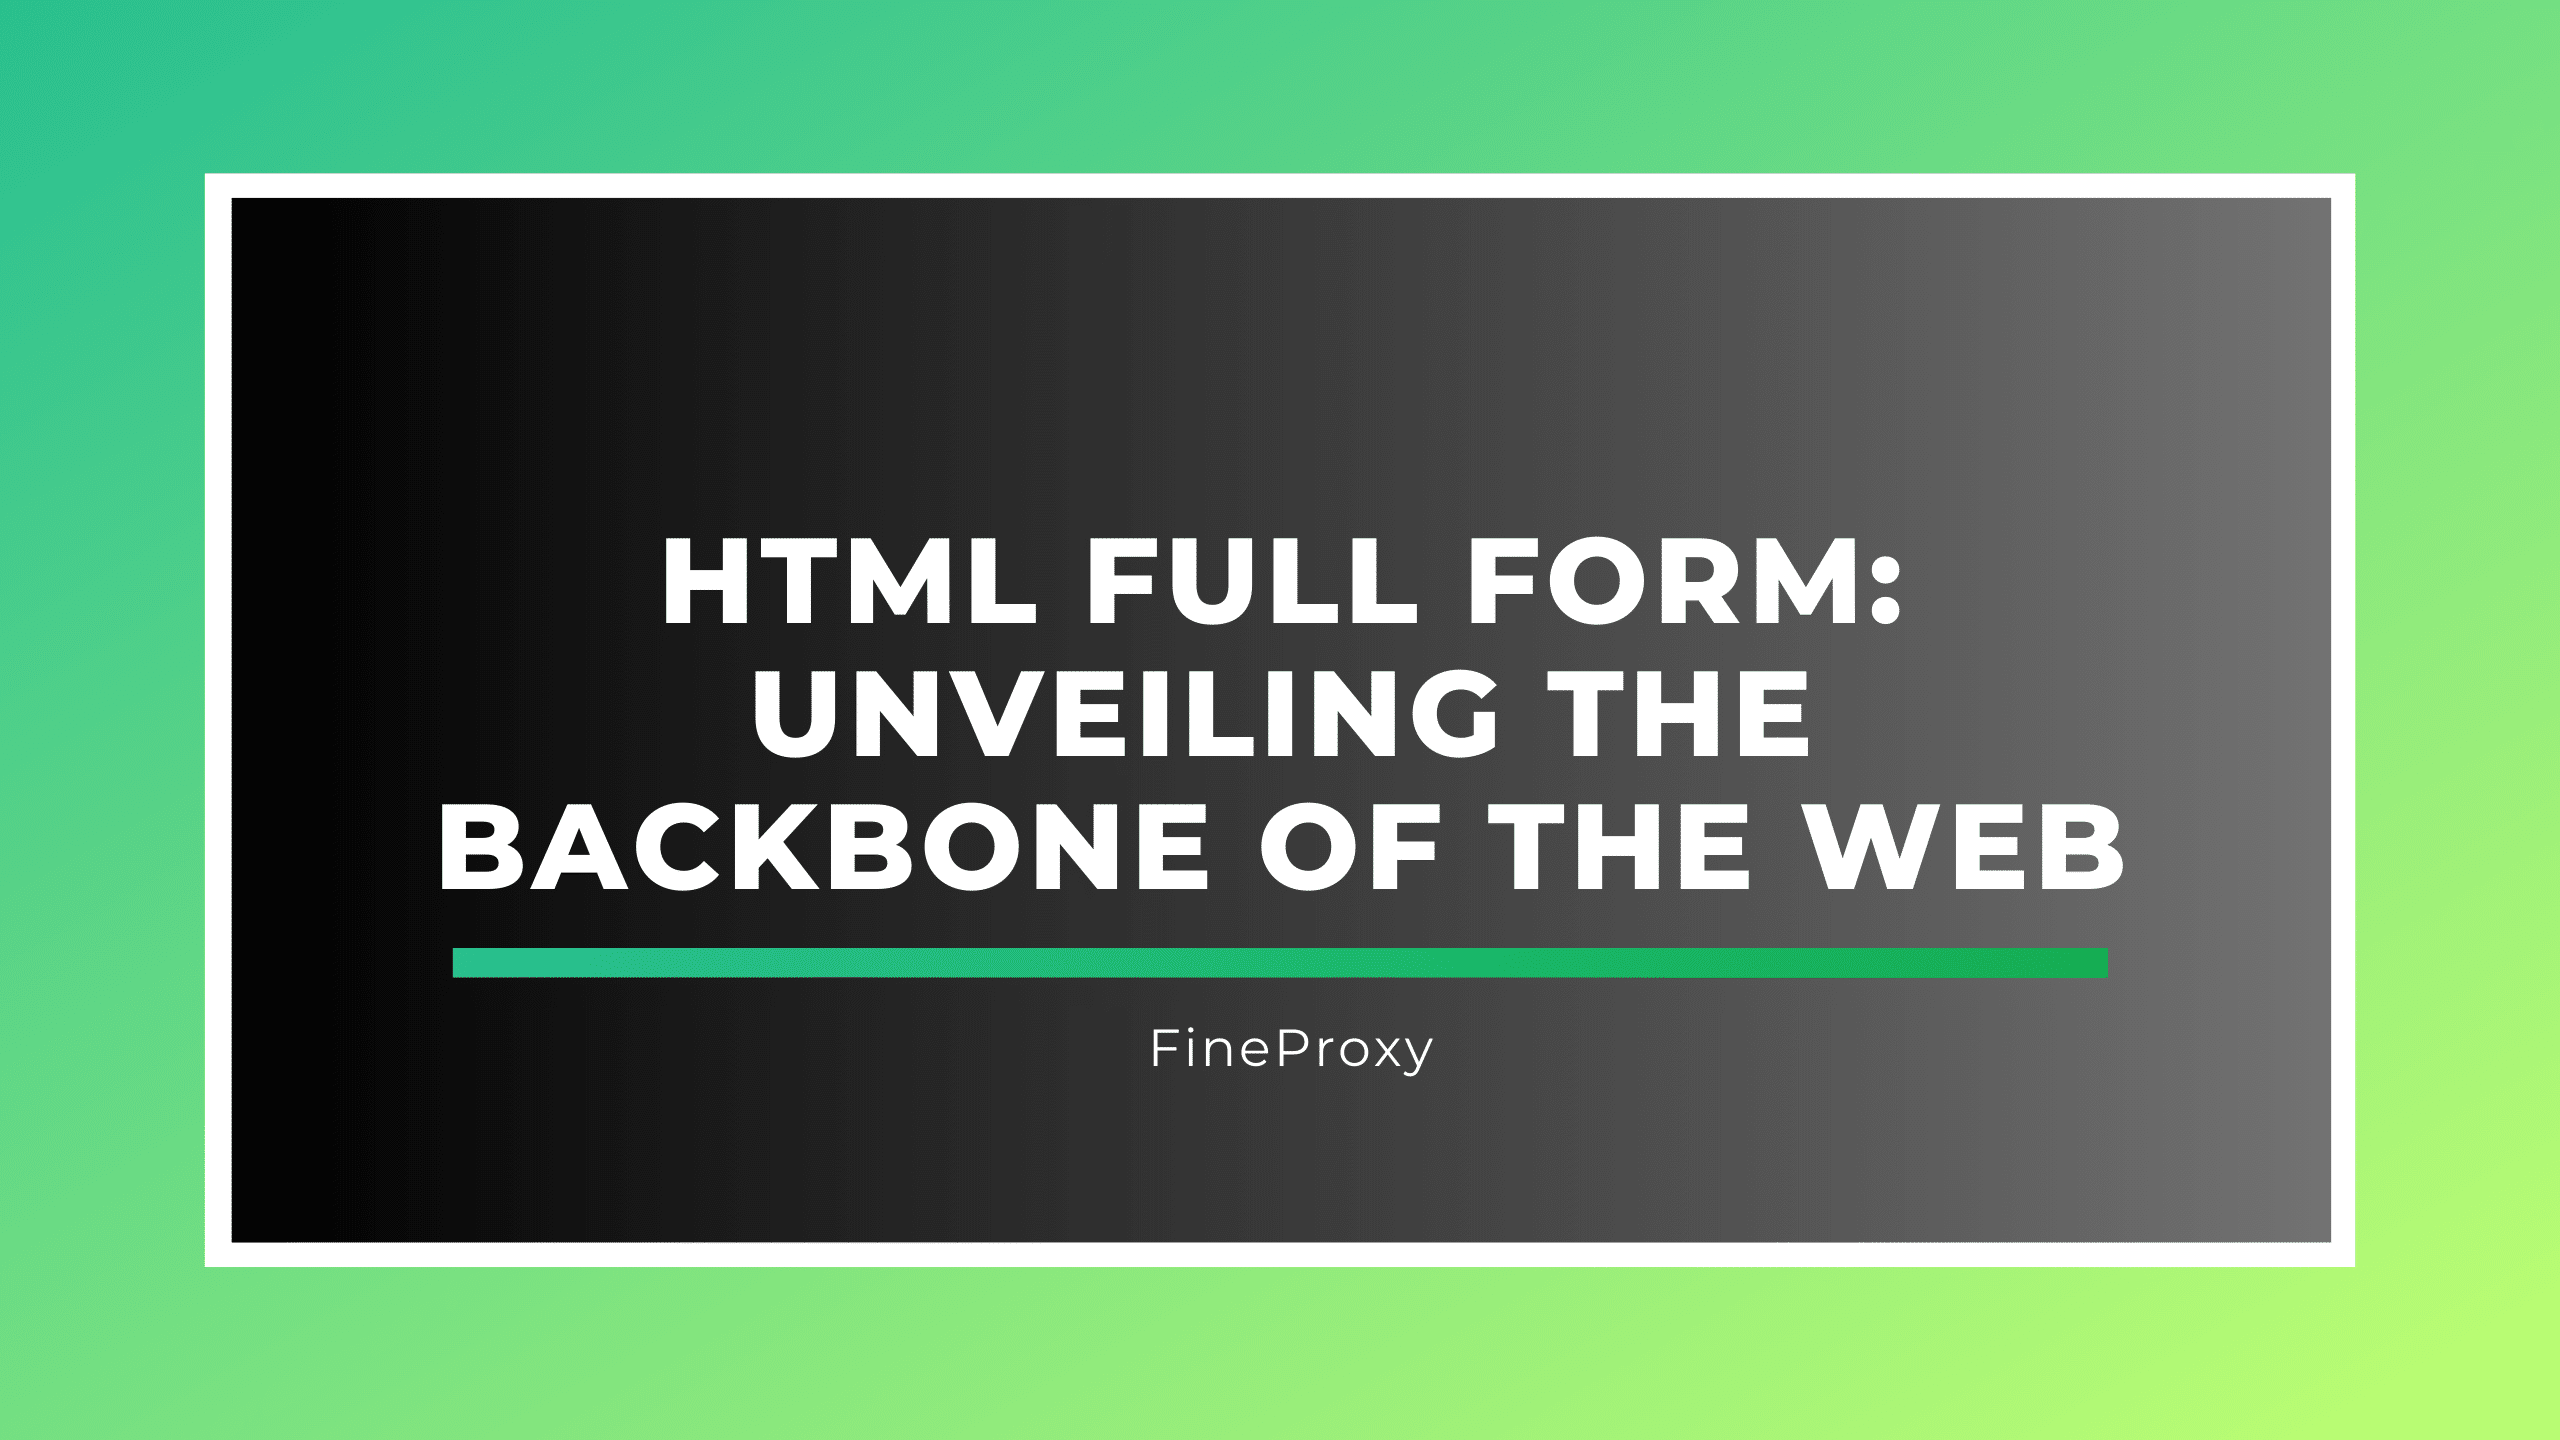 HTML Full Form: Unveiling the Backbone of the Web